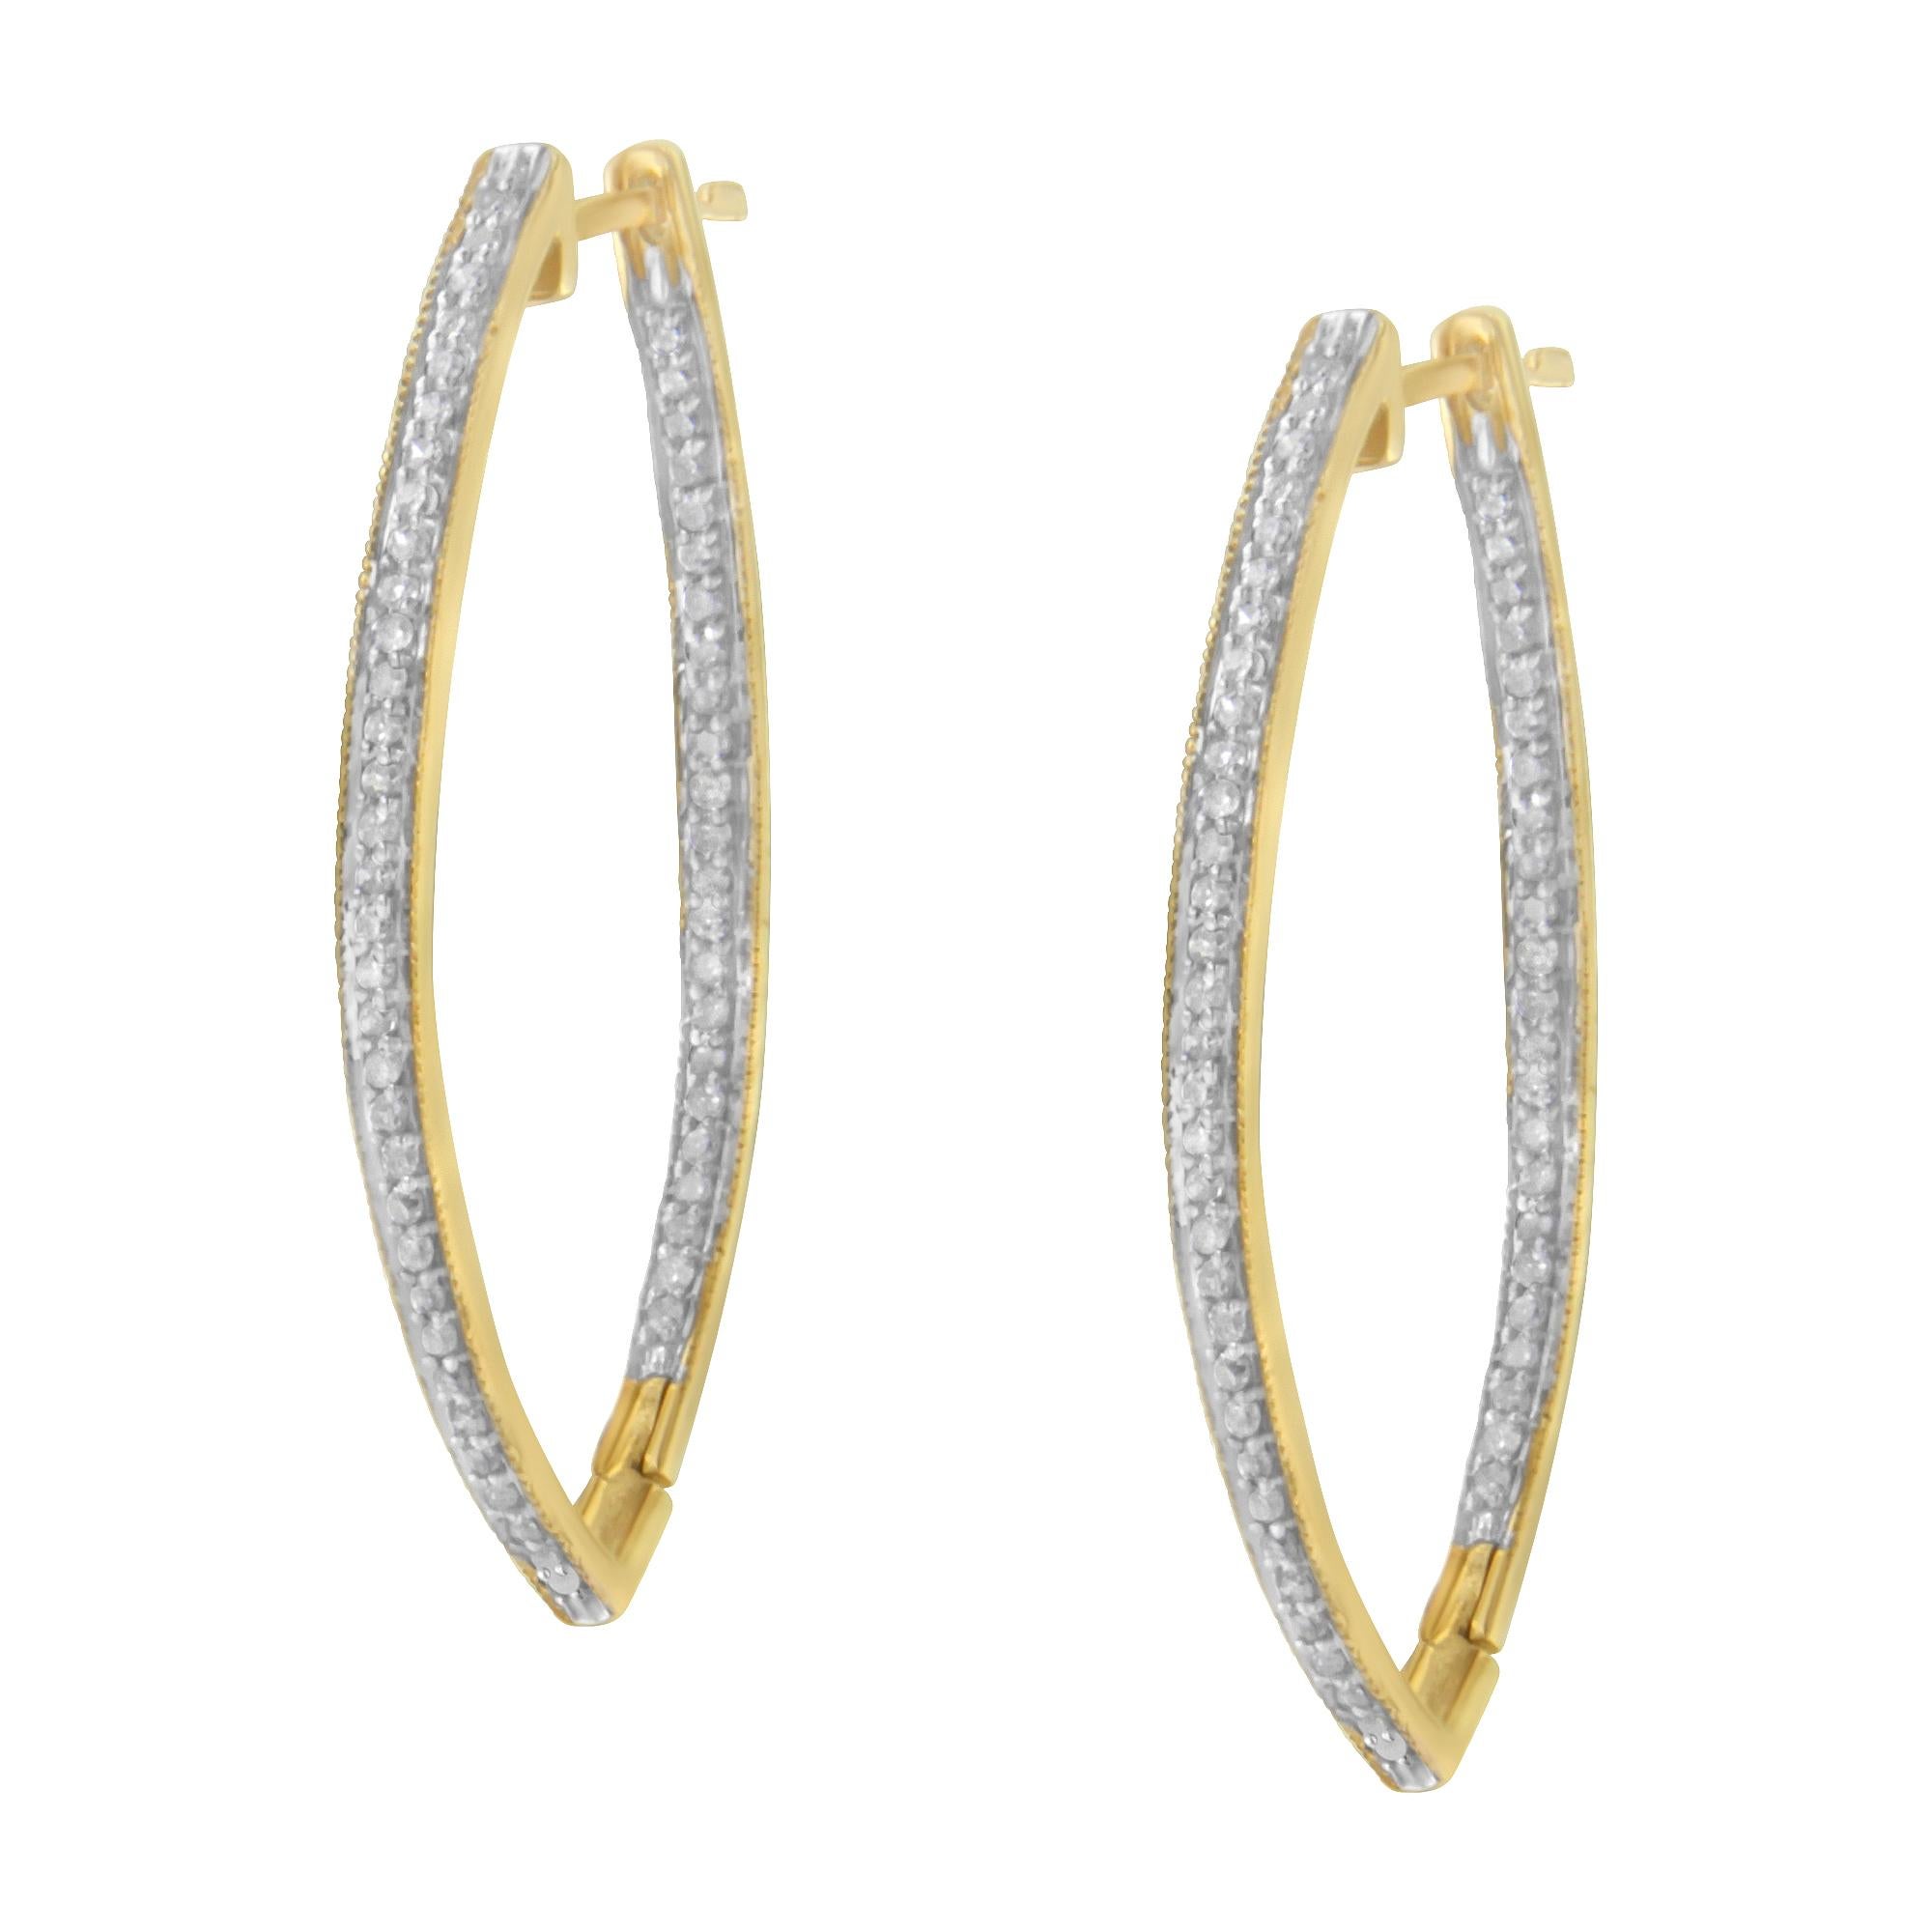 10K Yellow Gold Round Cut 1.0 Carat Diamond Hoop Earrings In New Condition For Sale In New York, NY